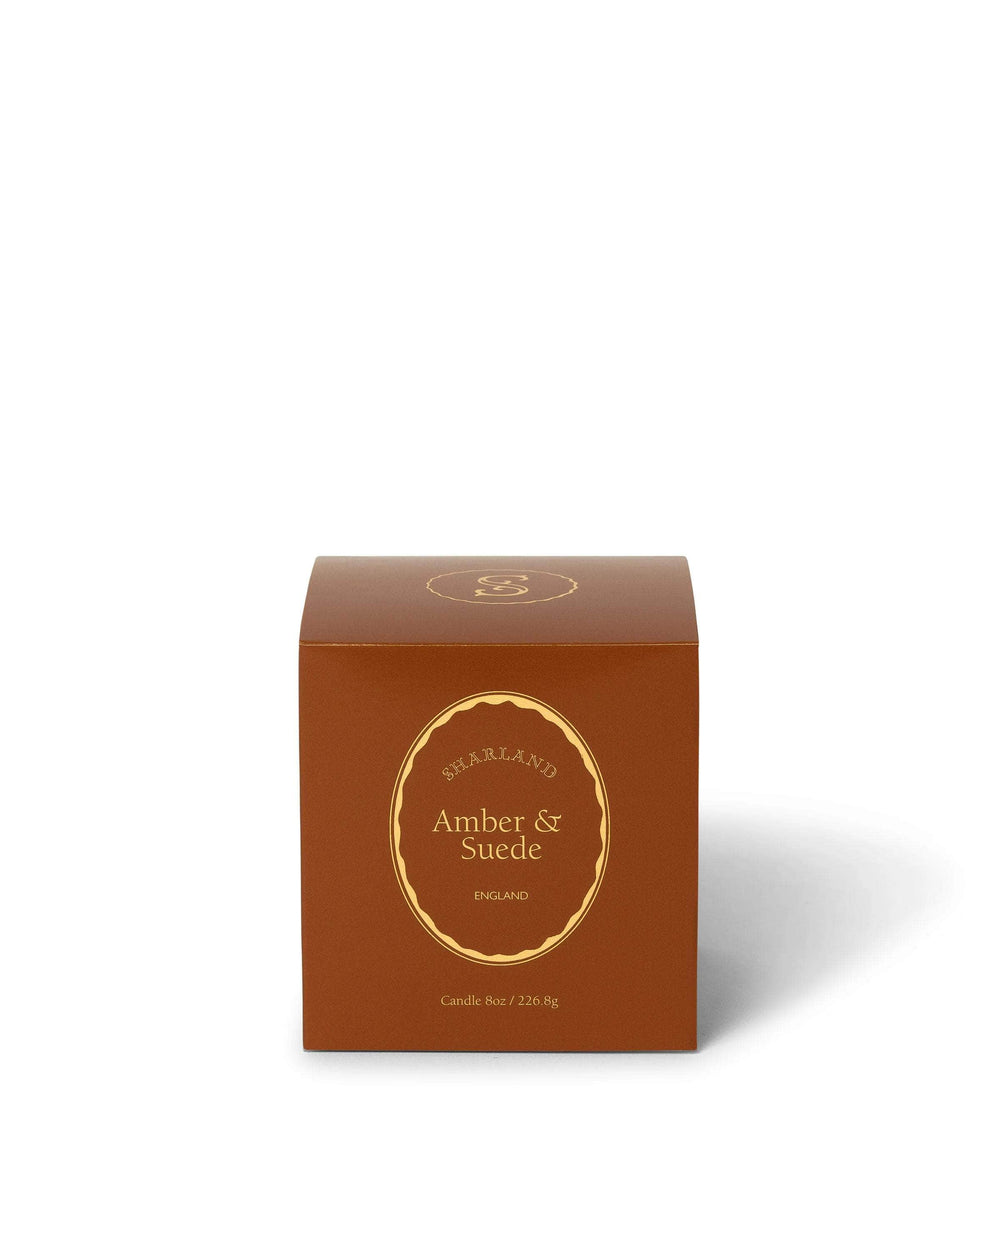 Amber & Suede Candle 225g